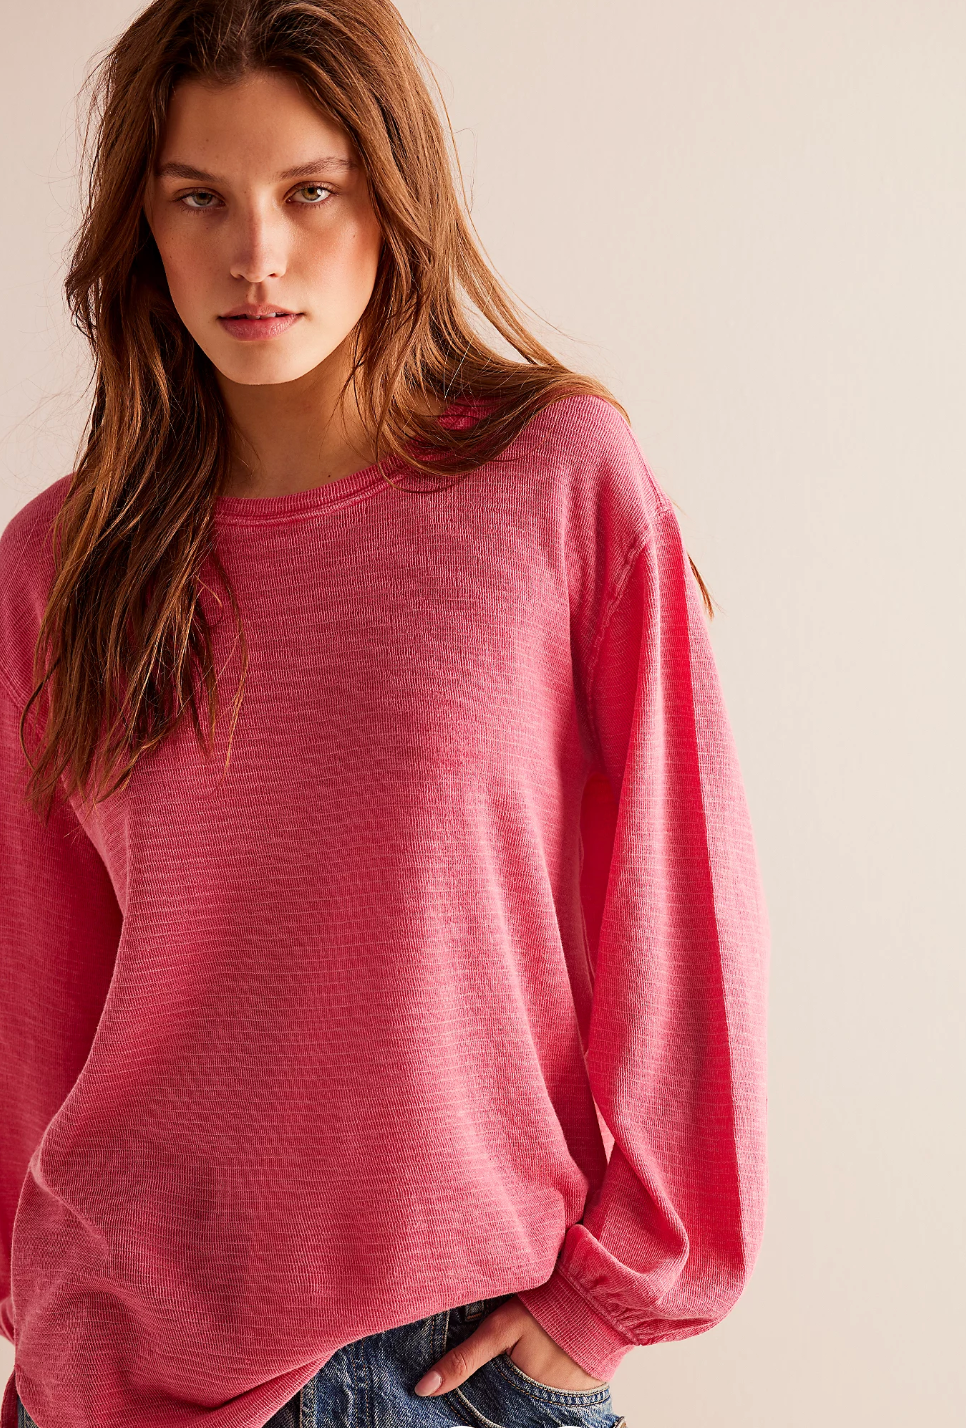 We the Free People SOUL Song Long Sleeve Tee in Dragonfruit Pink